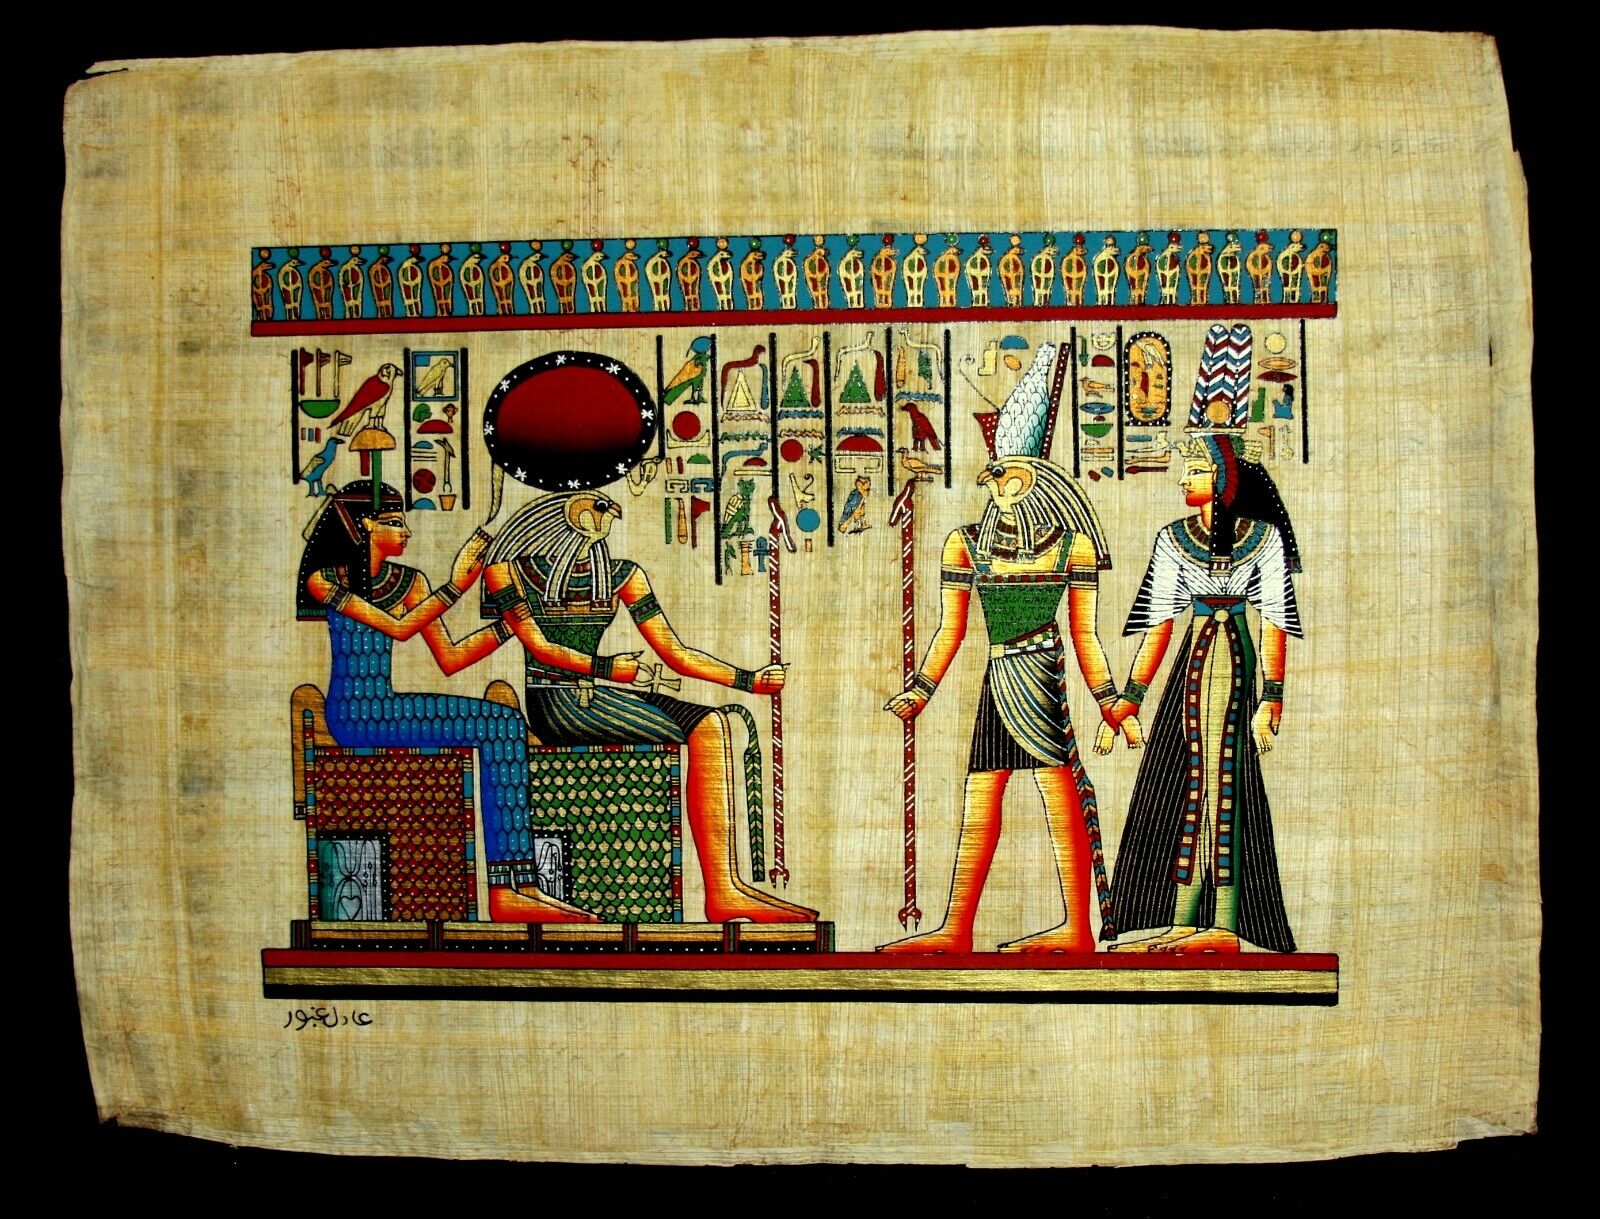 Rare Authentic Hand Painted Ancient Egyptian Papyrus-Nefertari Journey to A/life